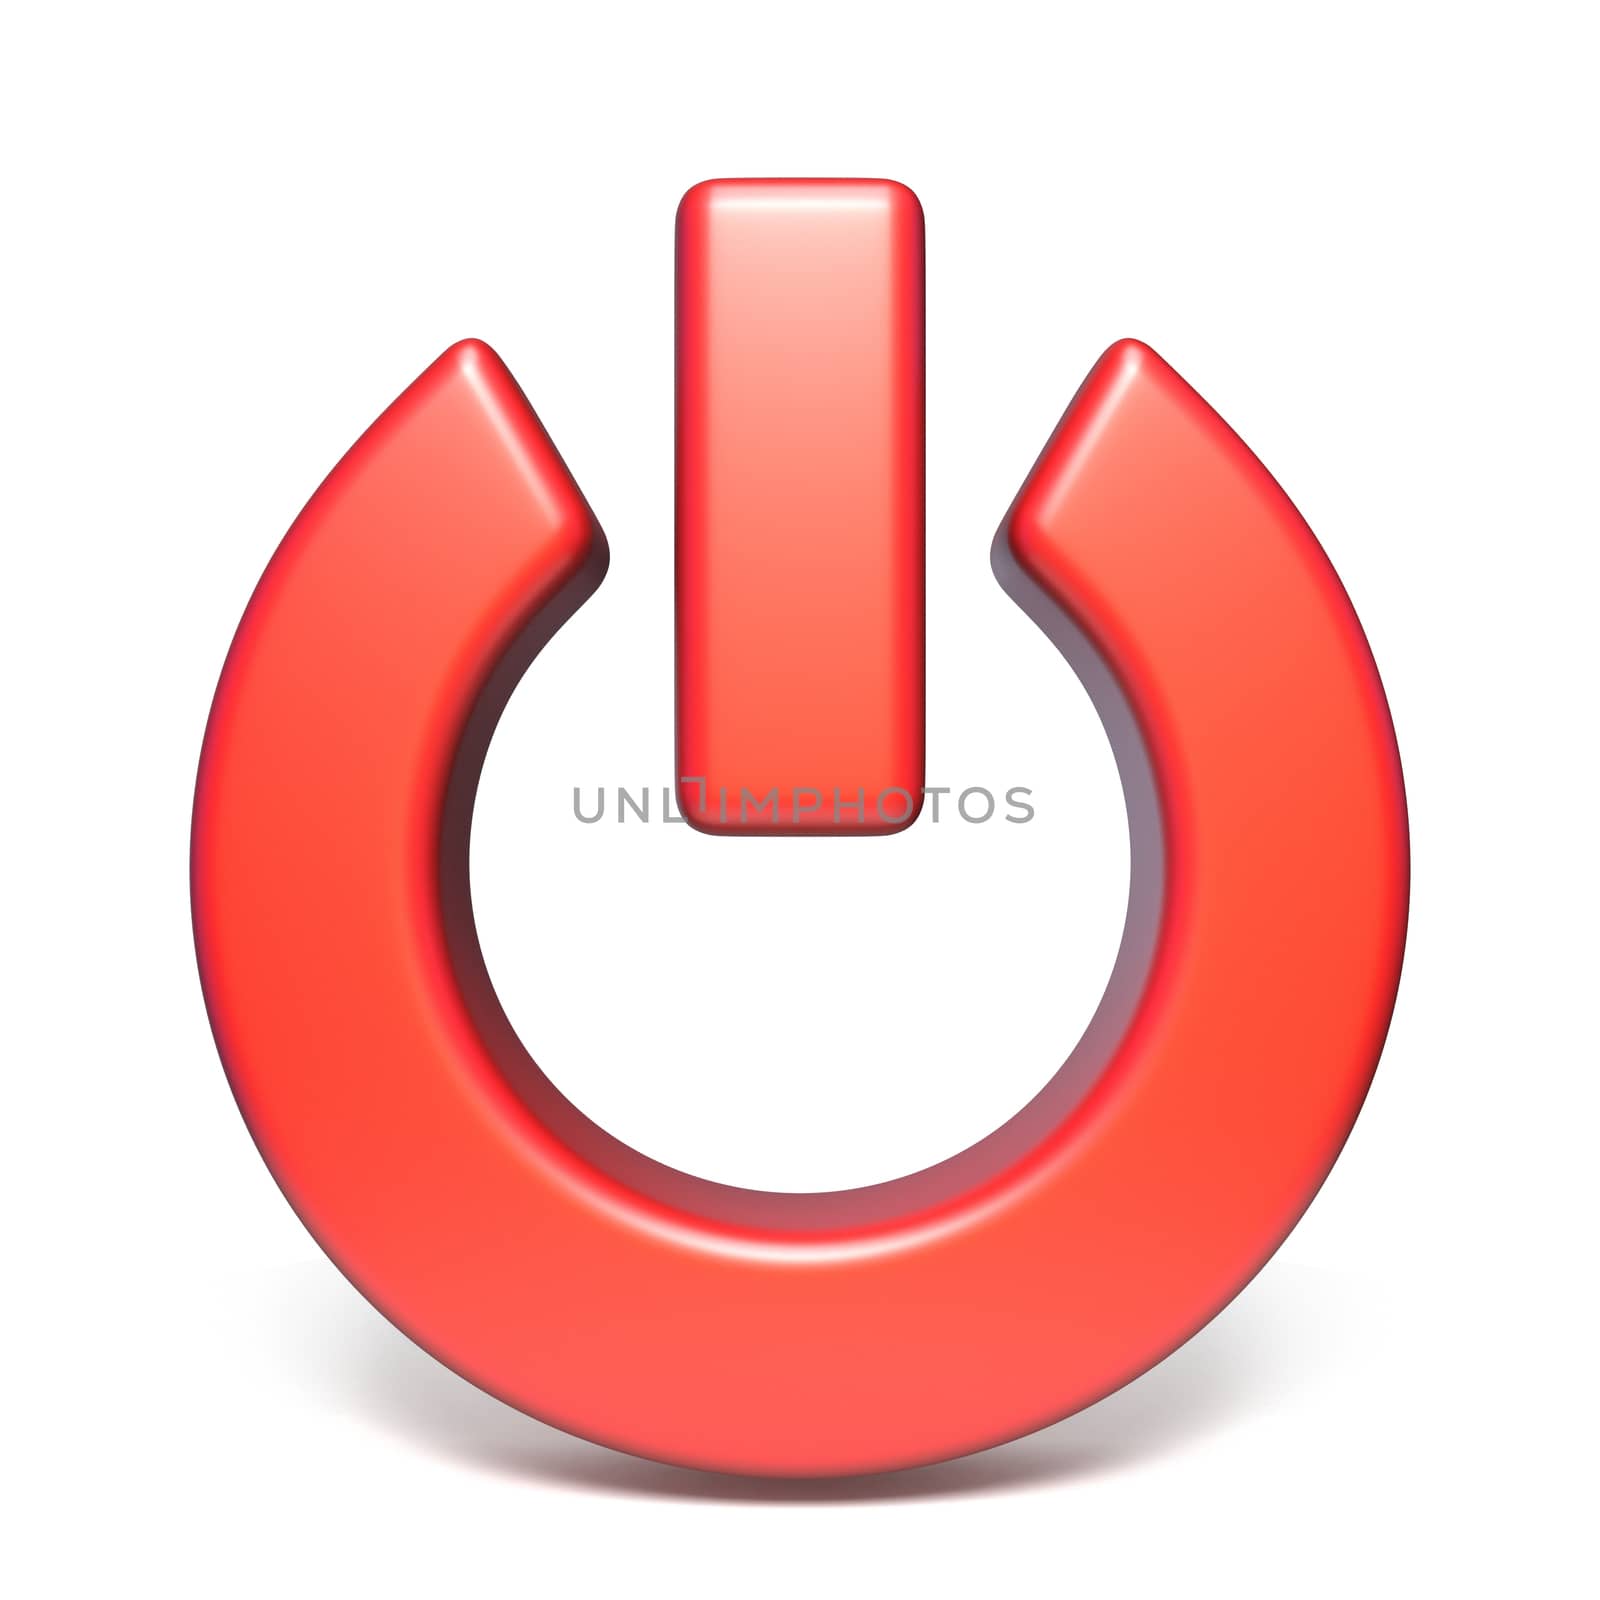 Red power sign 3D rendering illustration isolated on white background